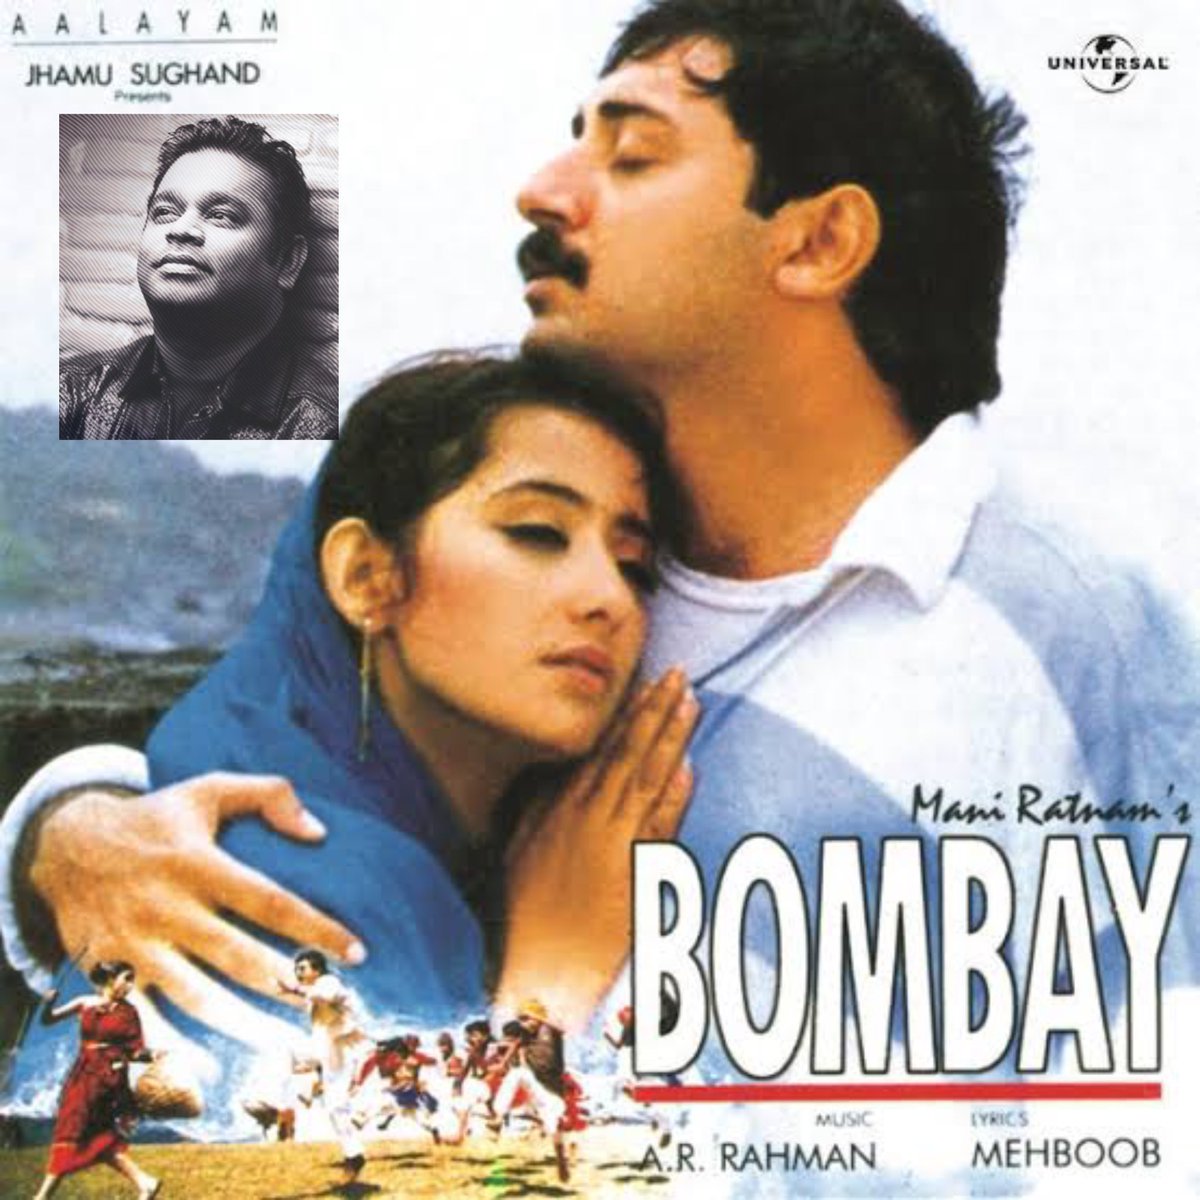 Greatest Hindi albums by AR Rahman for me:

Bombay
Roja
Taal
Dil Se
Saathiya

(Regardless of the original language; I’ve heard these just in Hindi)